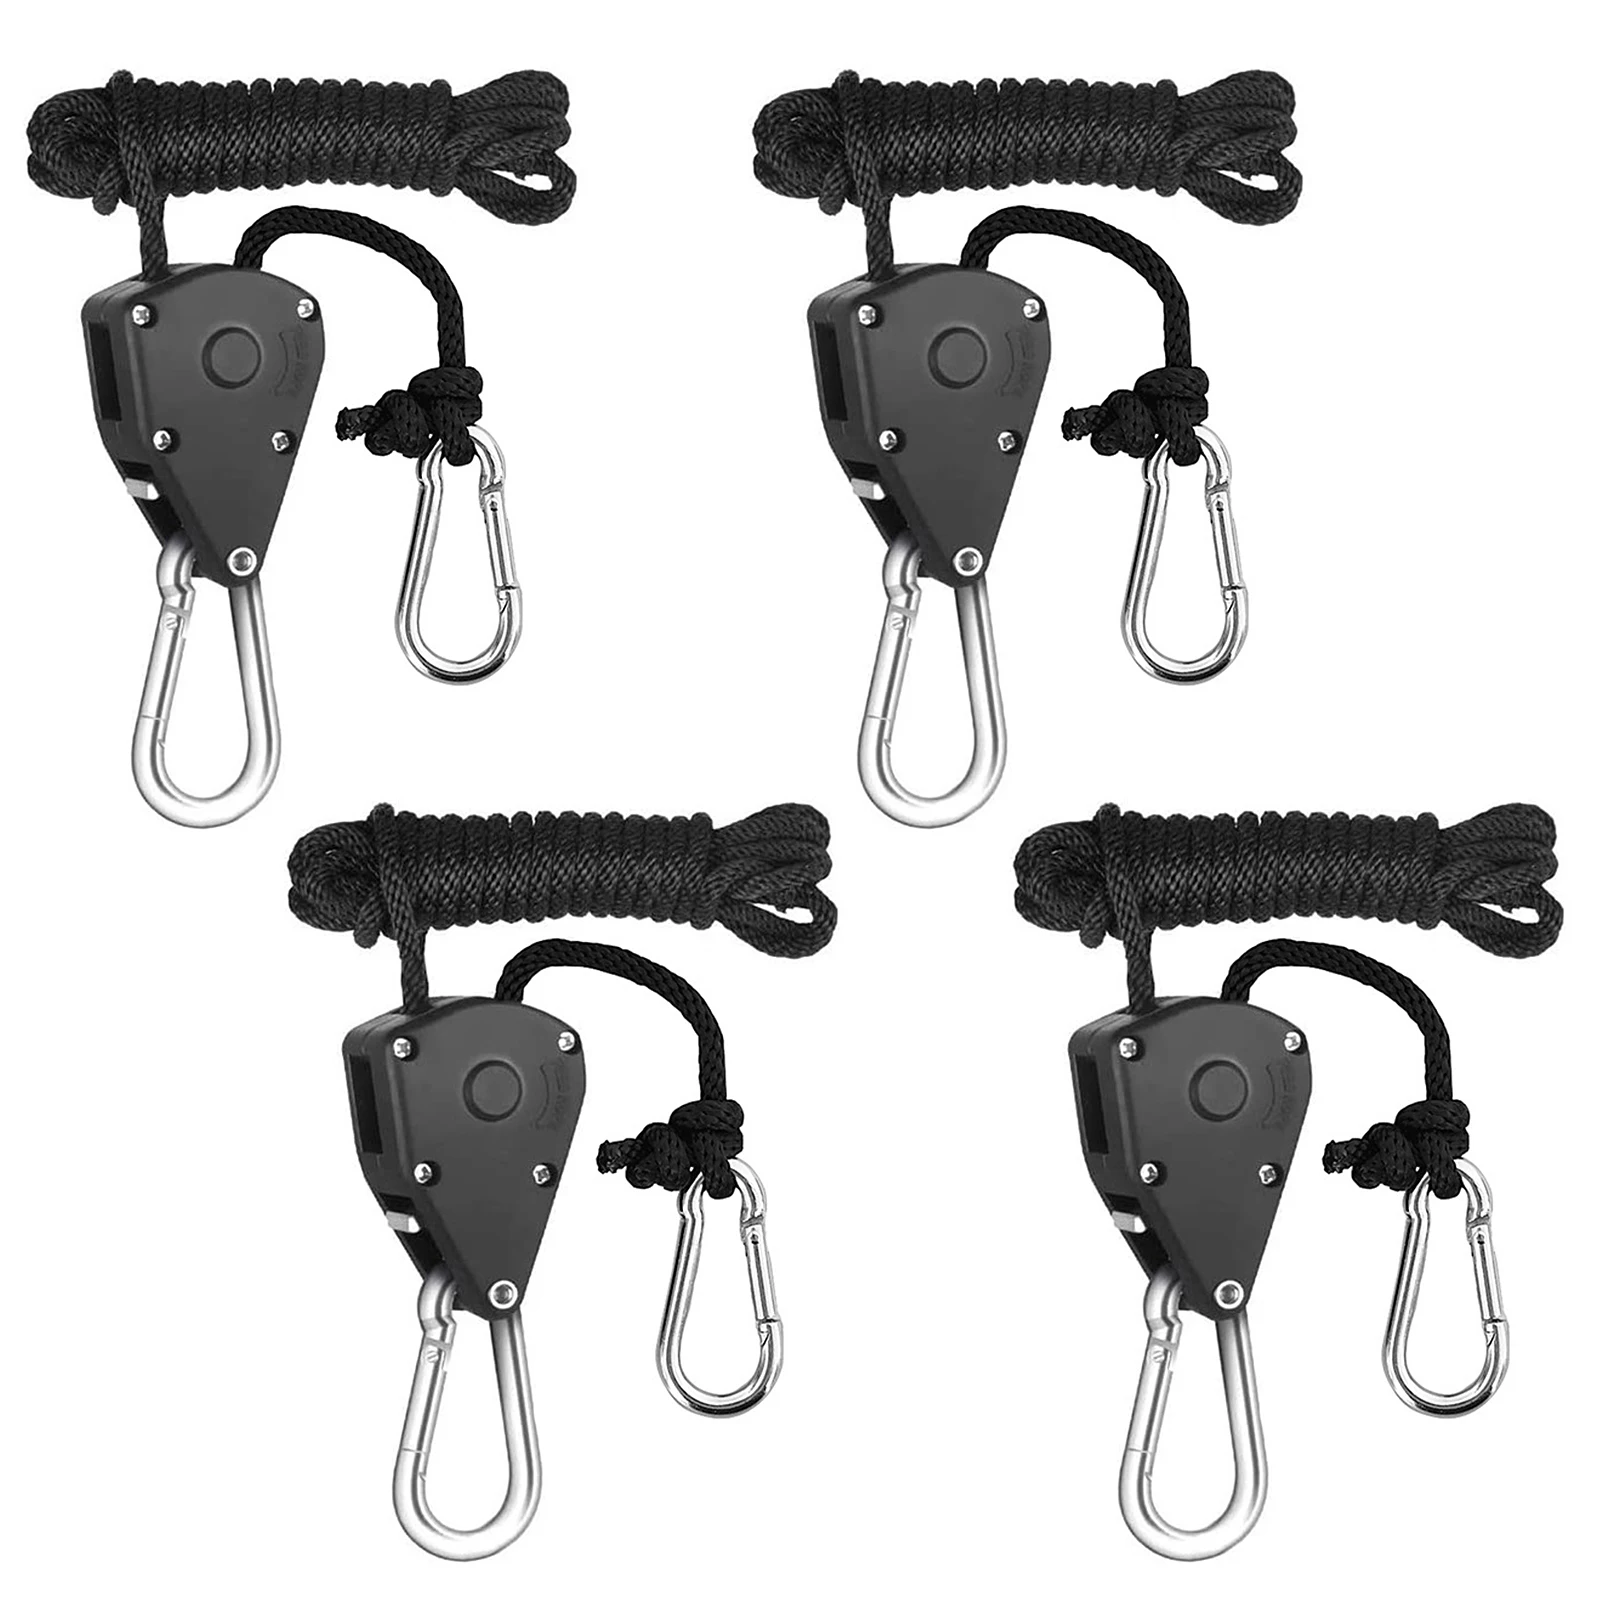 8pcs/4pcs/2pc Pulley Ratchets Kayak and Canoe Boat Bow Stern Rope Lock Tie Down Strap 1/8 Inch Heavy Duty Adjustable Rope Hanger